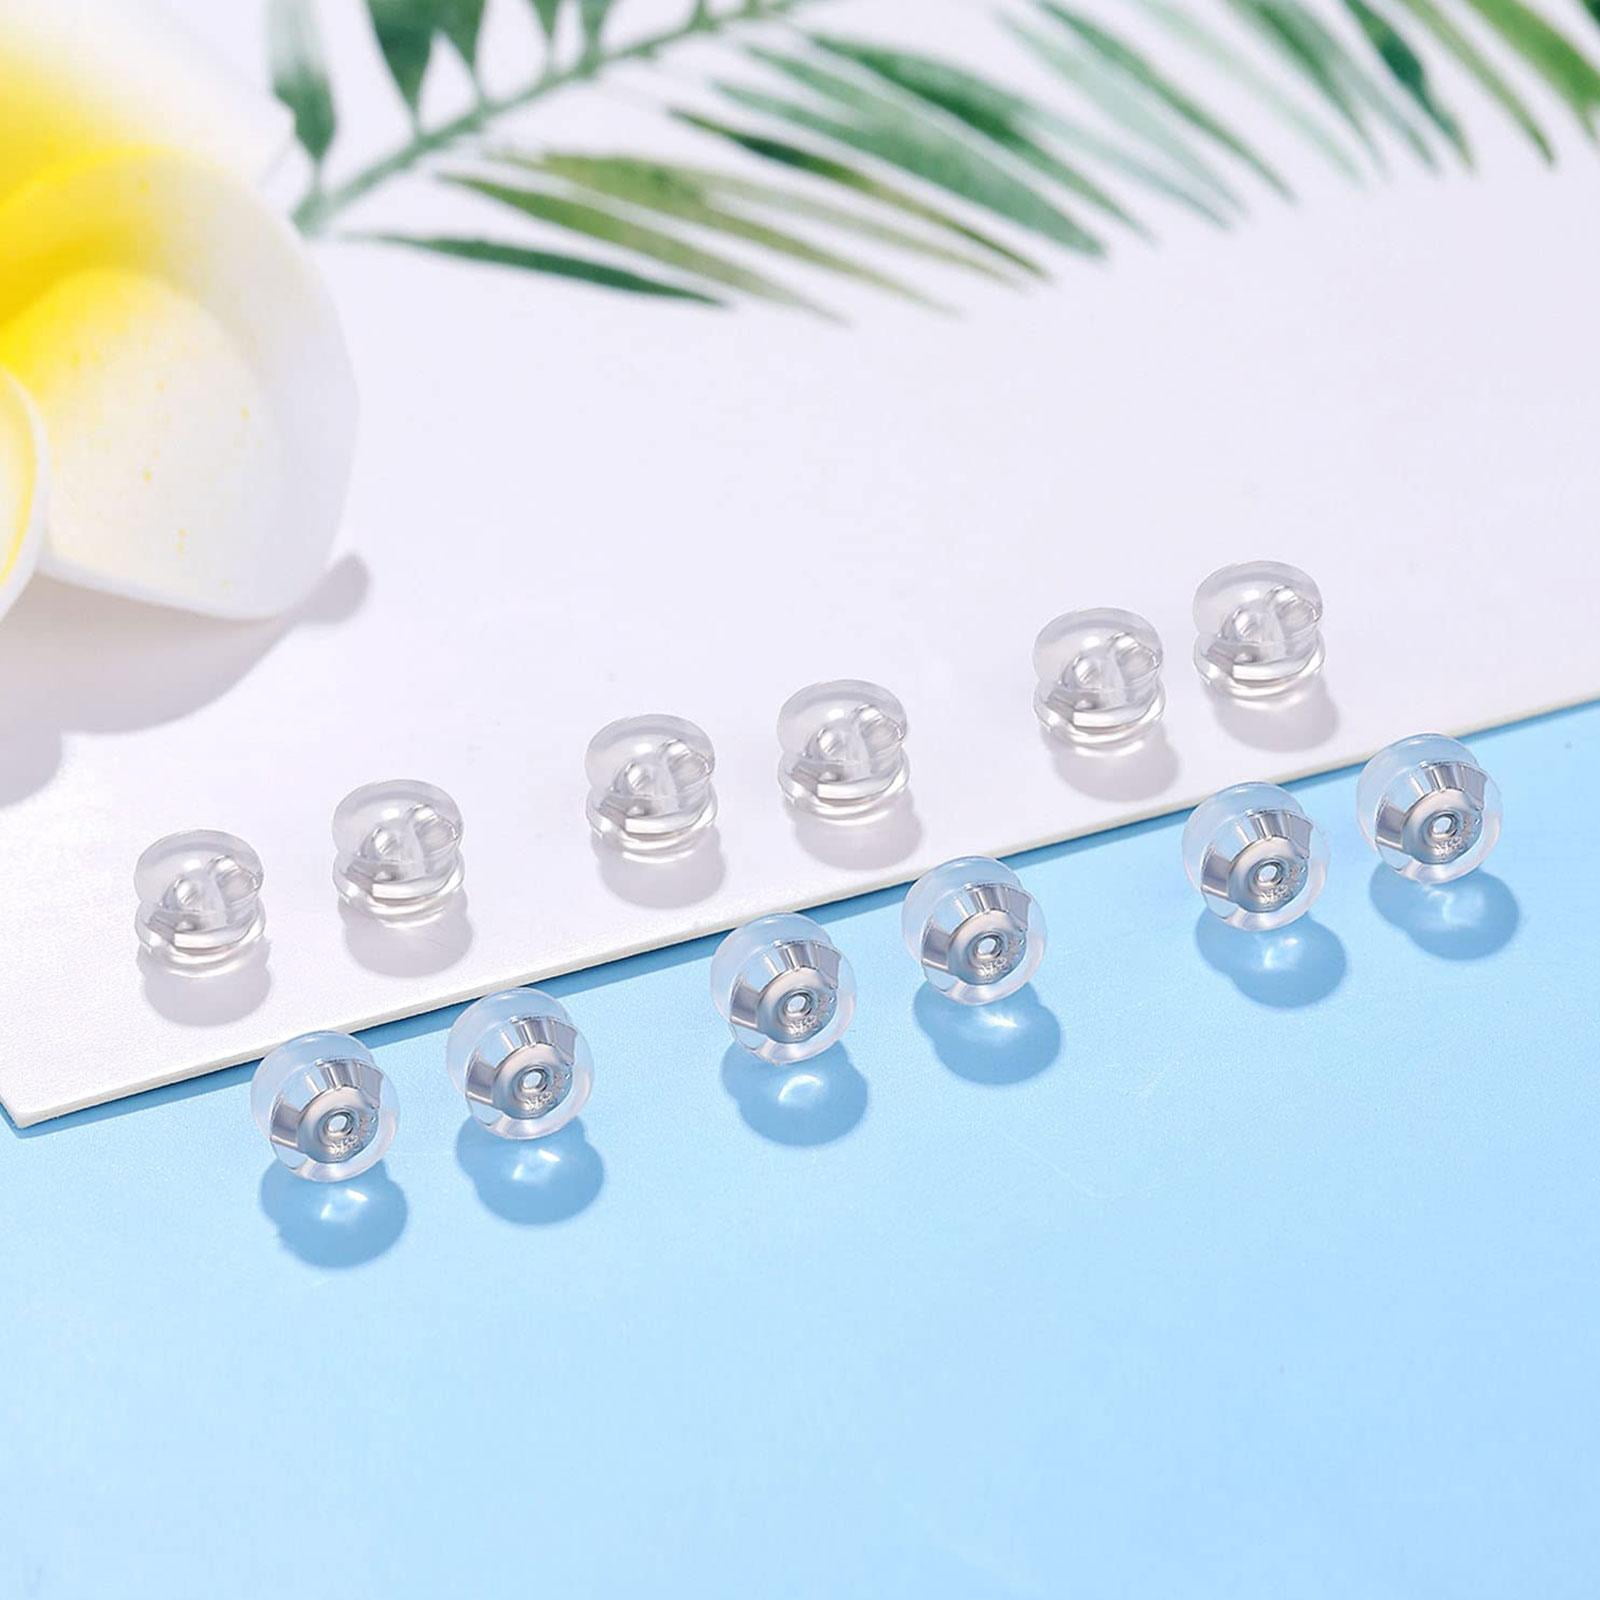 Kearace 14Pcs Silicone Earring Backs Replacements for Studs/Droopy  Ears，Locking Secure Earring Backs for Studs，No-Irritate Hypoallergenice for